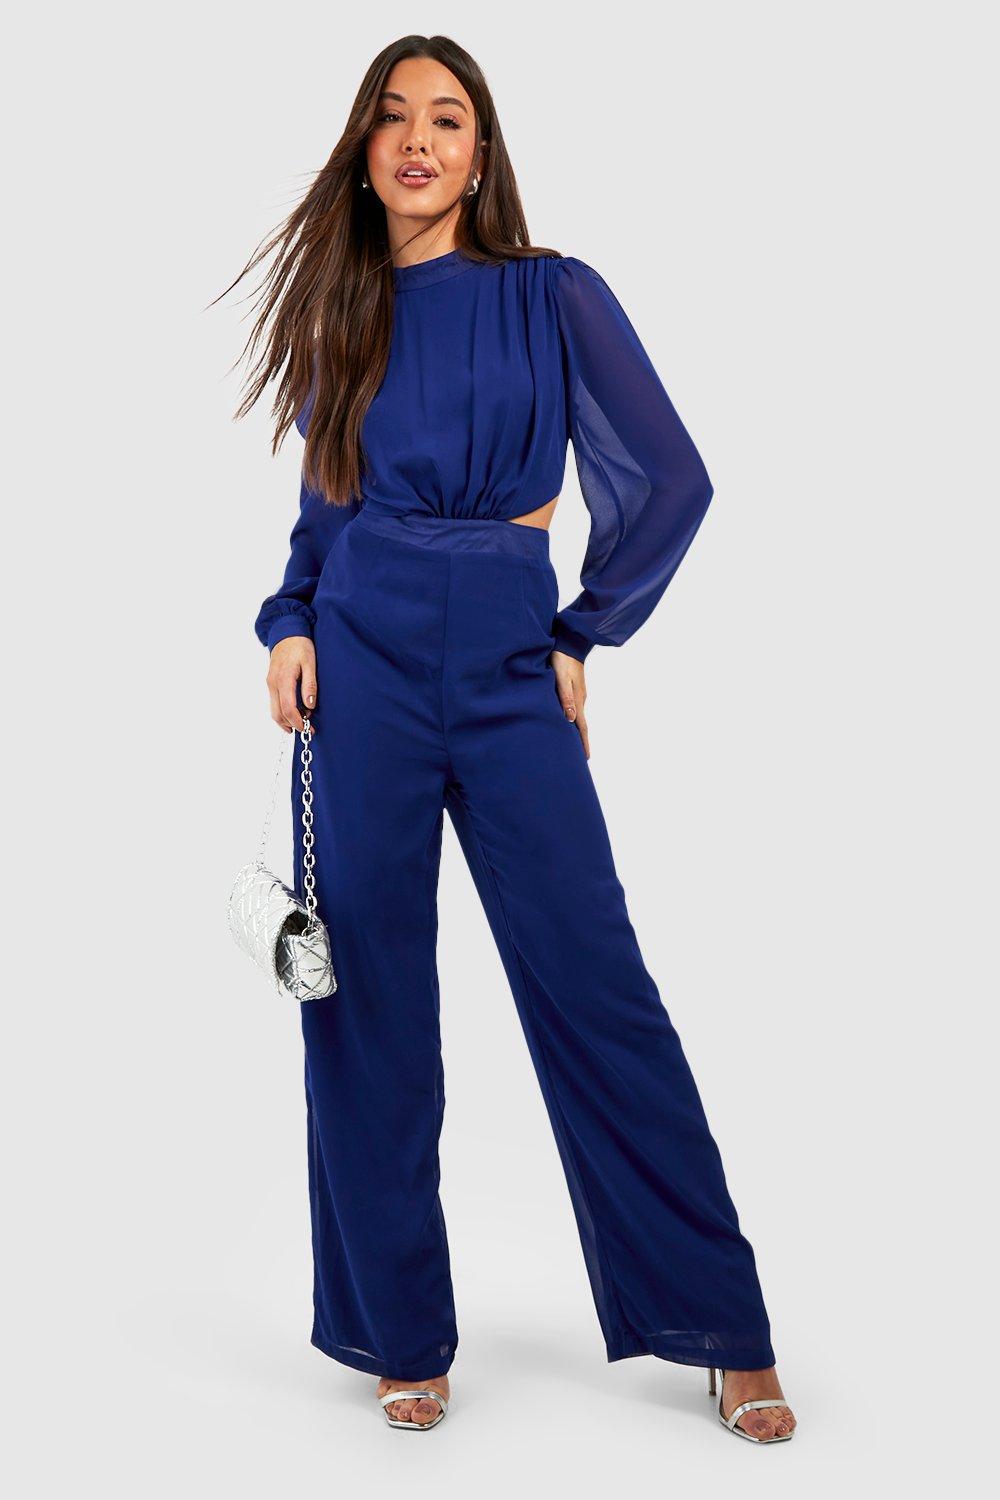 Summer Outfits Streetwear Jumpsuits Women Long Sleeve Bodycon Rompers  Jumpsuit Skinny Blue Mesh See Though One-piece Overalls - AliExpress